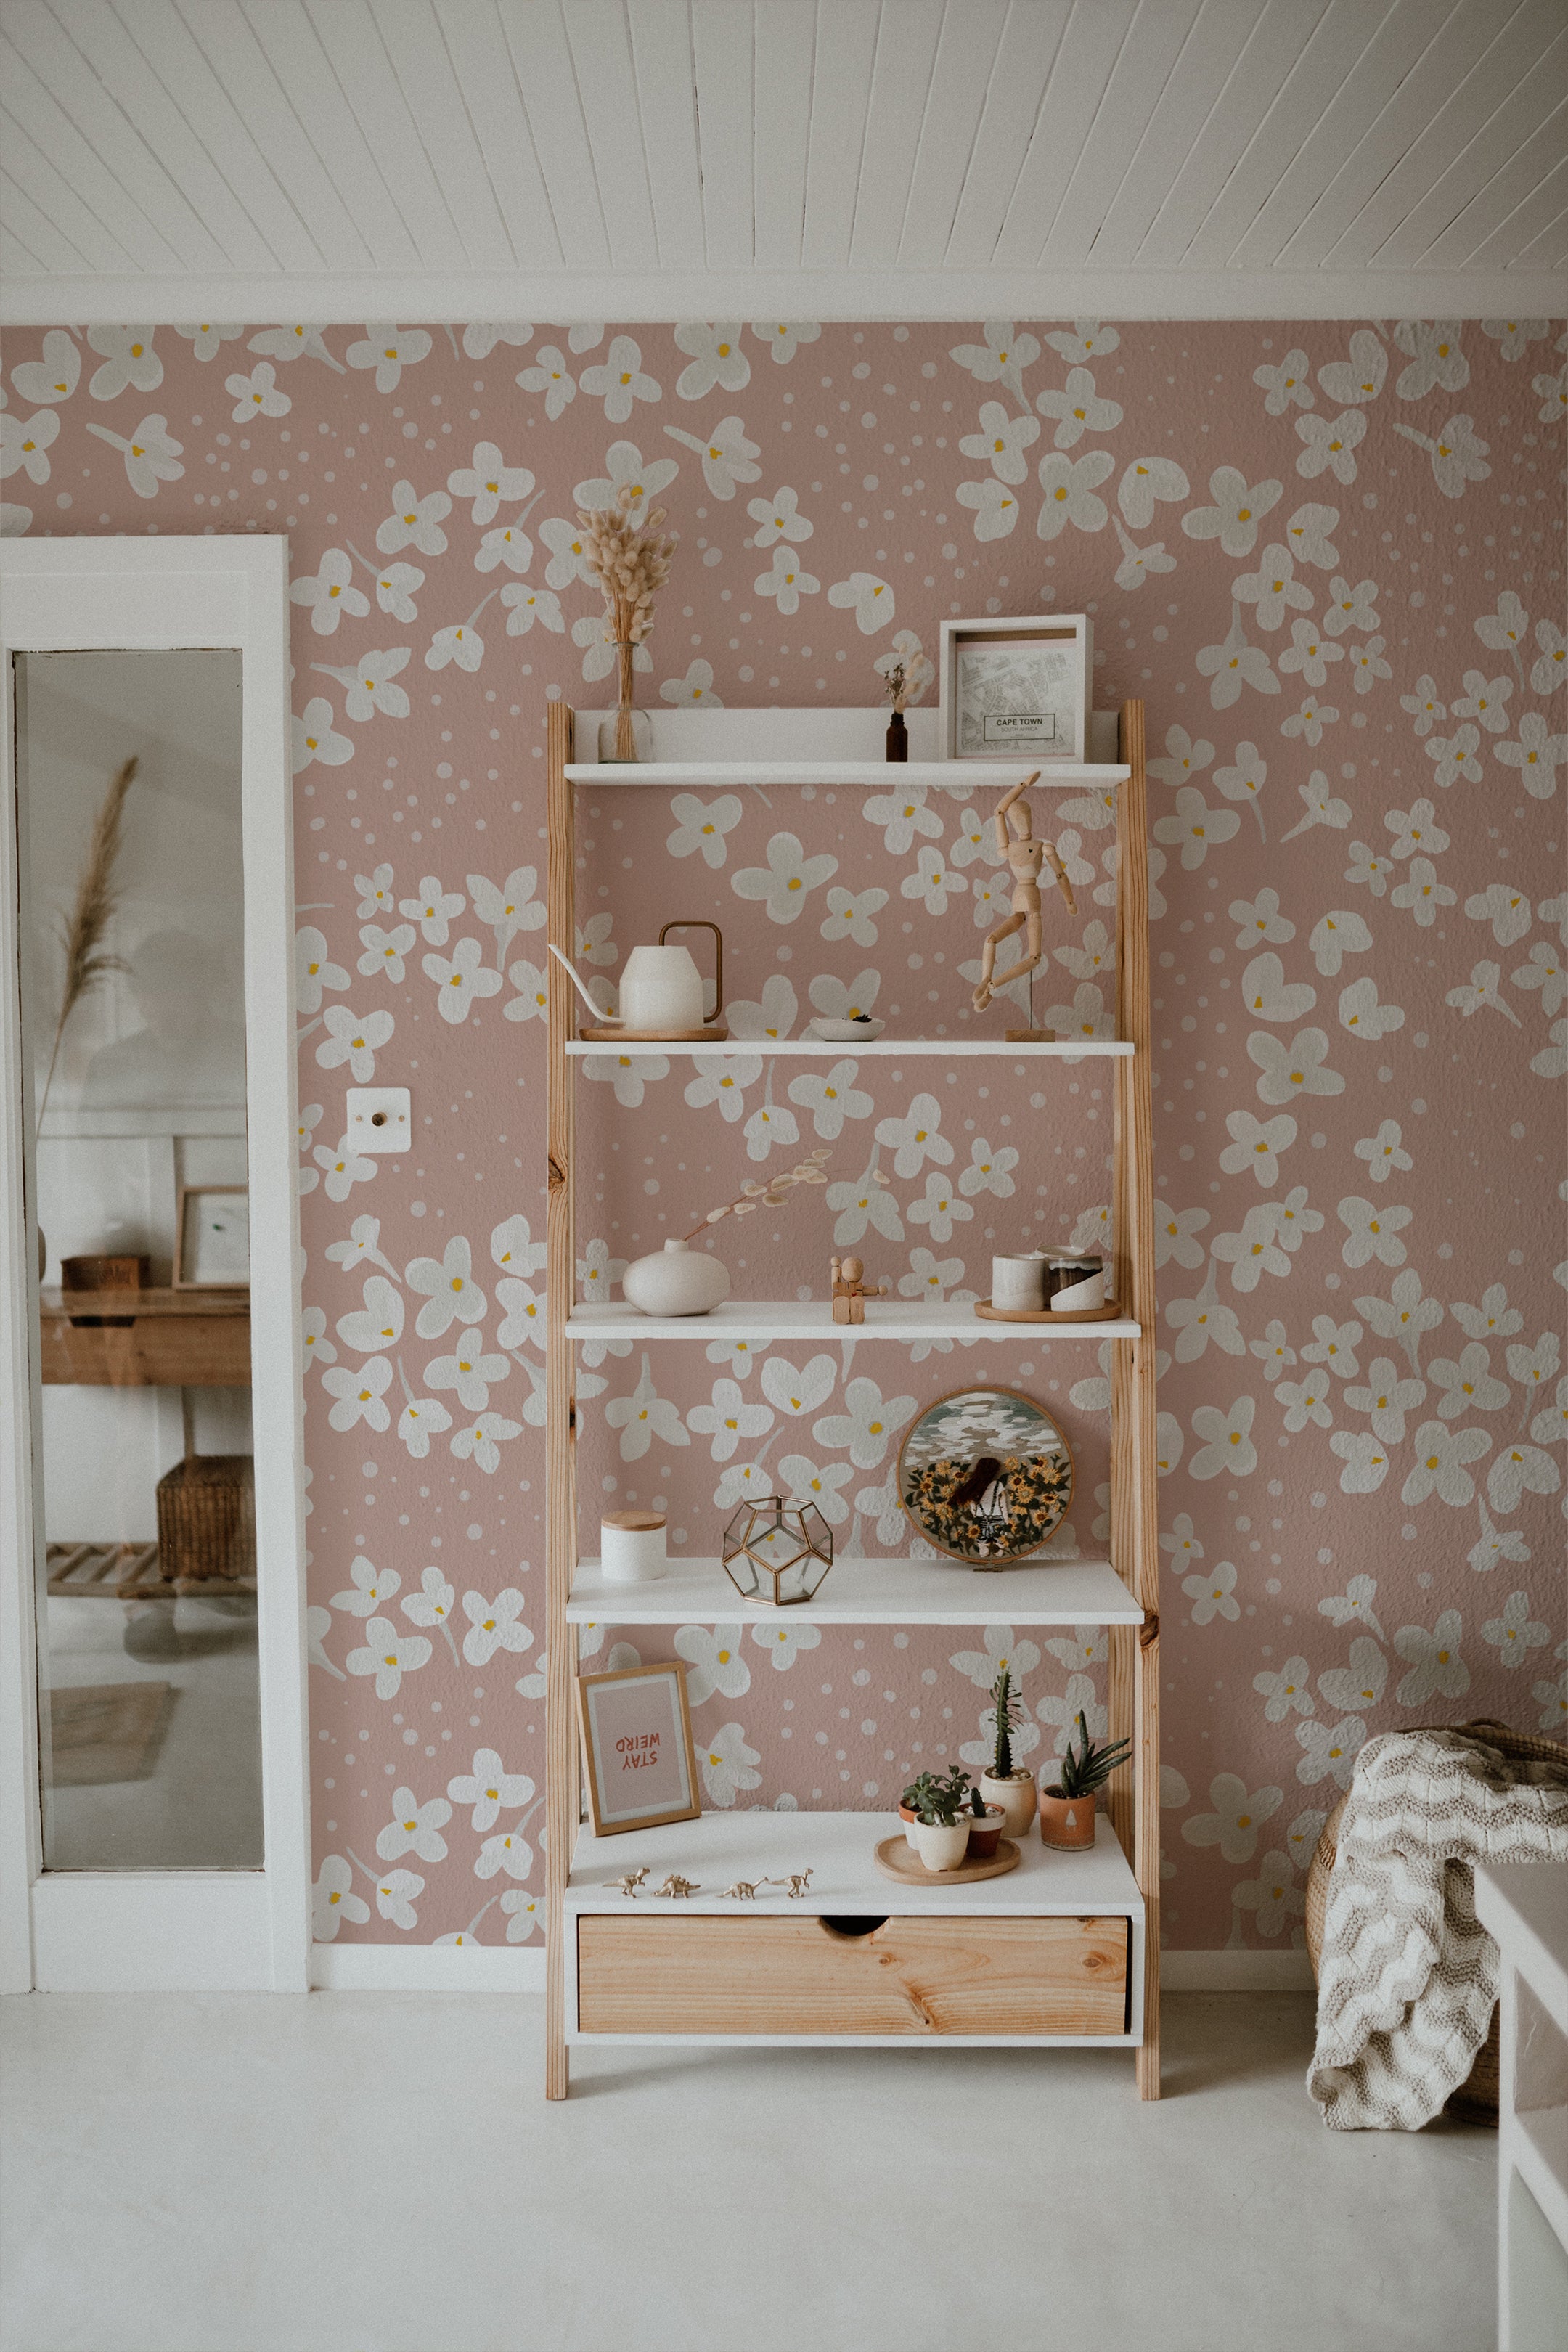 A stylish shelving unit against the Fleur de Printemps Wallpaper in a living room, showing off the wallpaper’s large floral patterns and dotted texture that enhances the room's aesthetic.